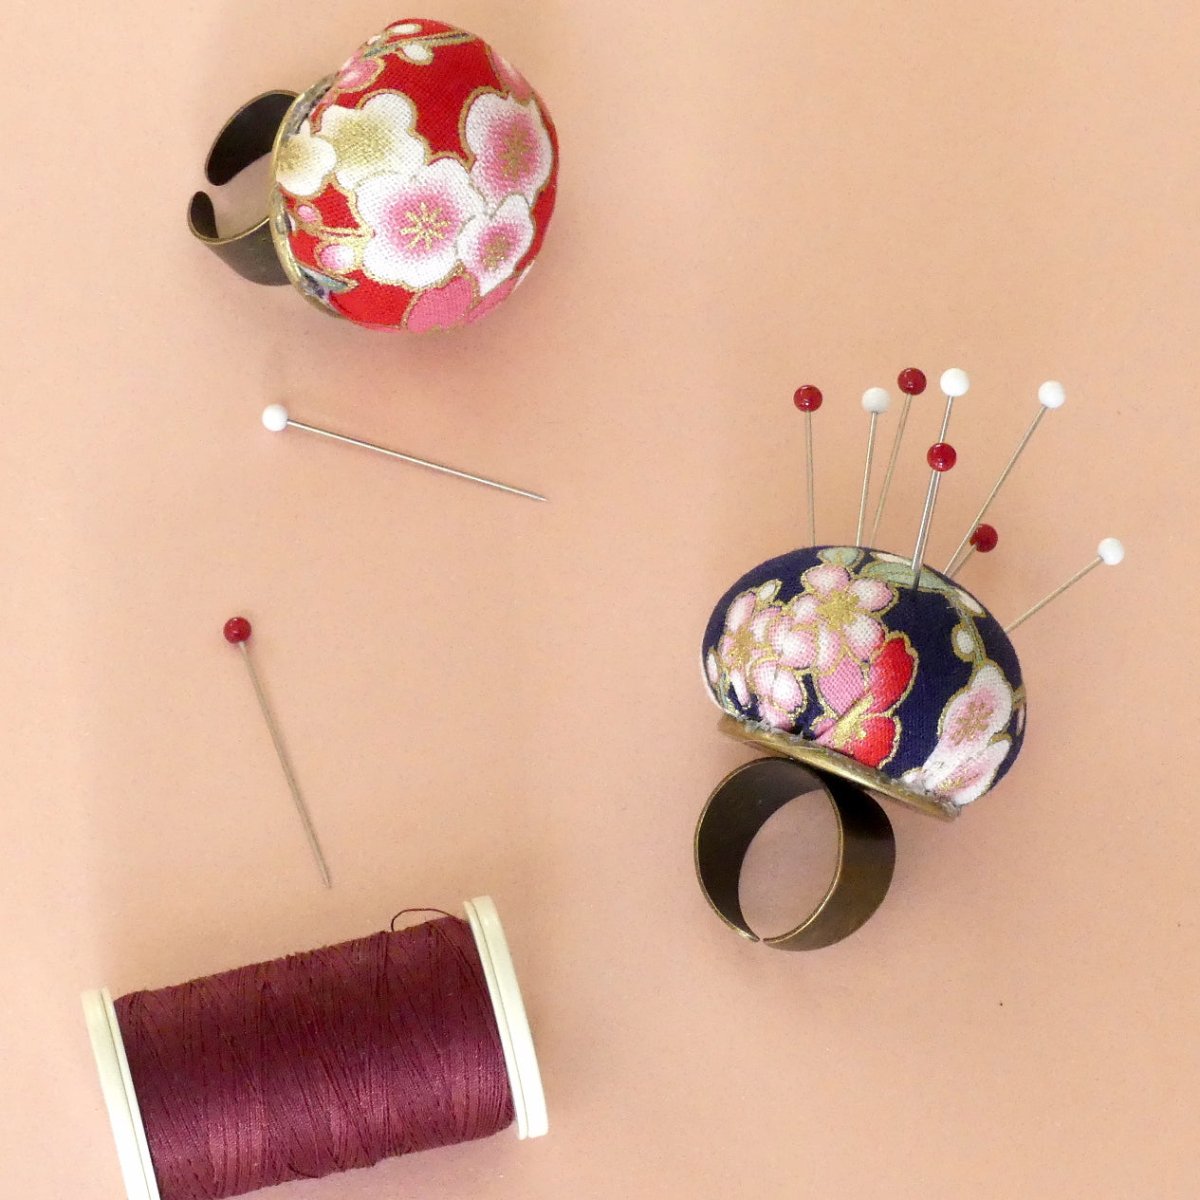 Ring Pin Cushion two-piece set with pins inserted and a maroon spool of thread